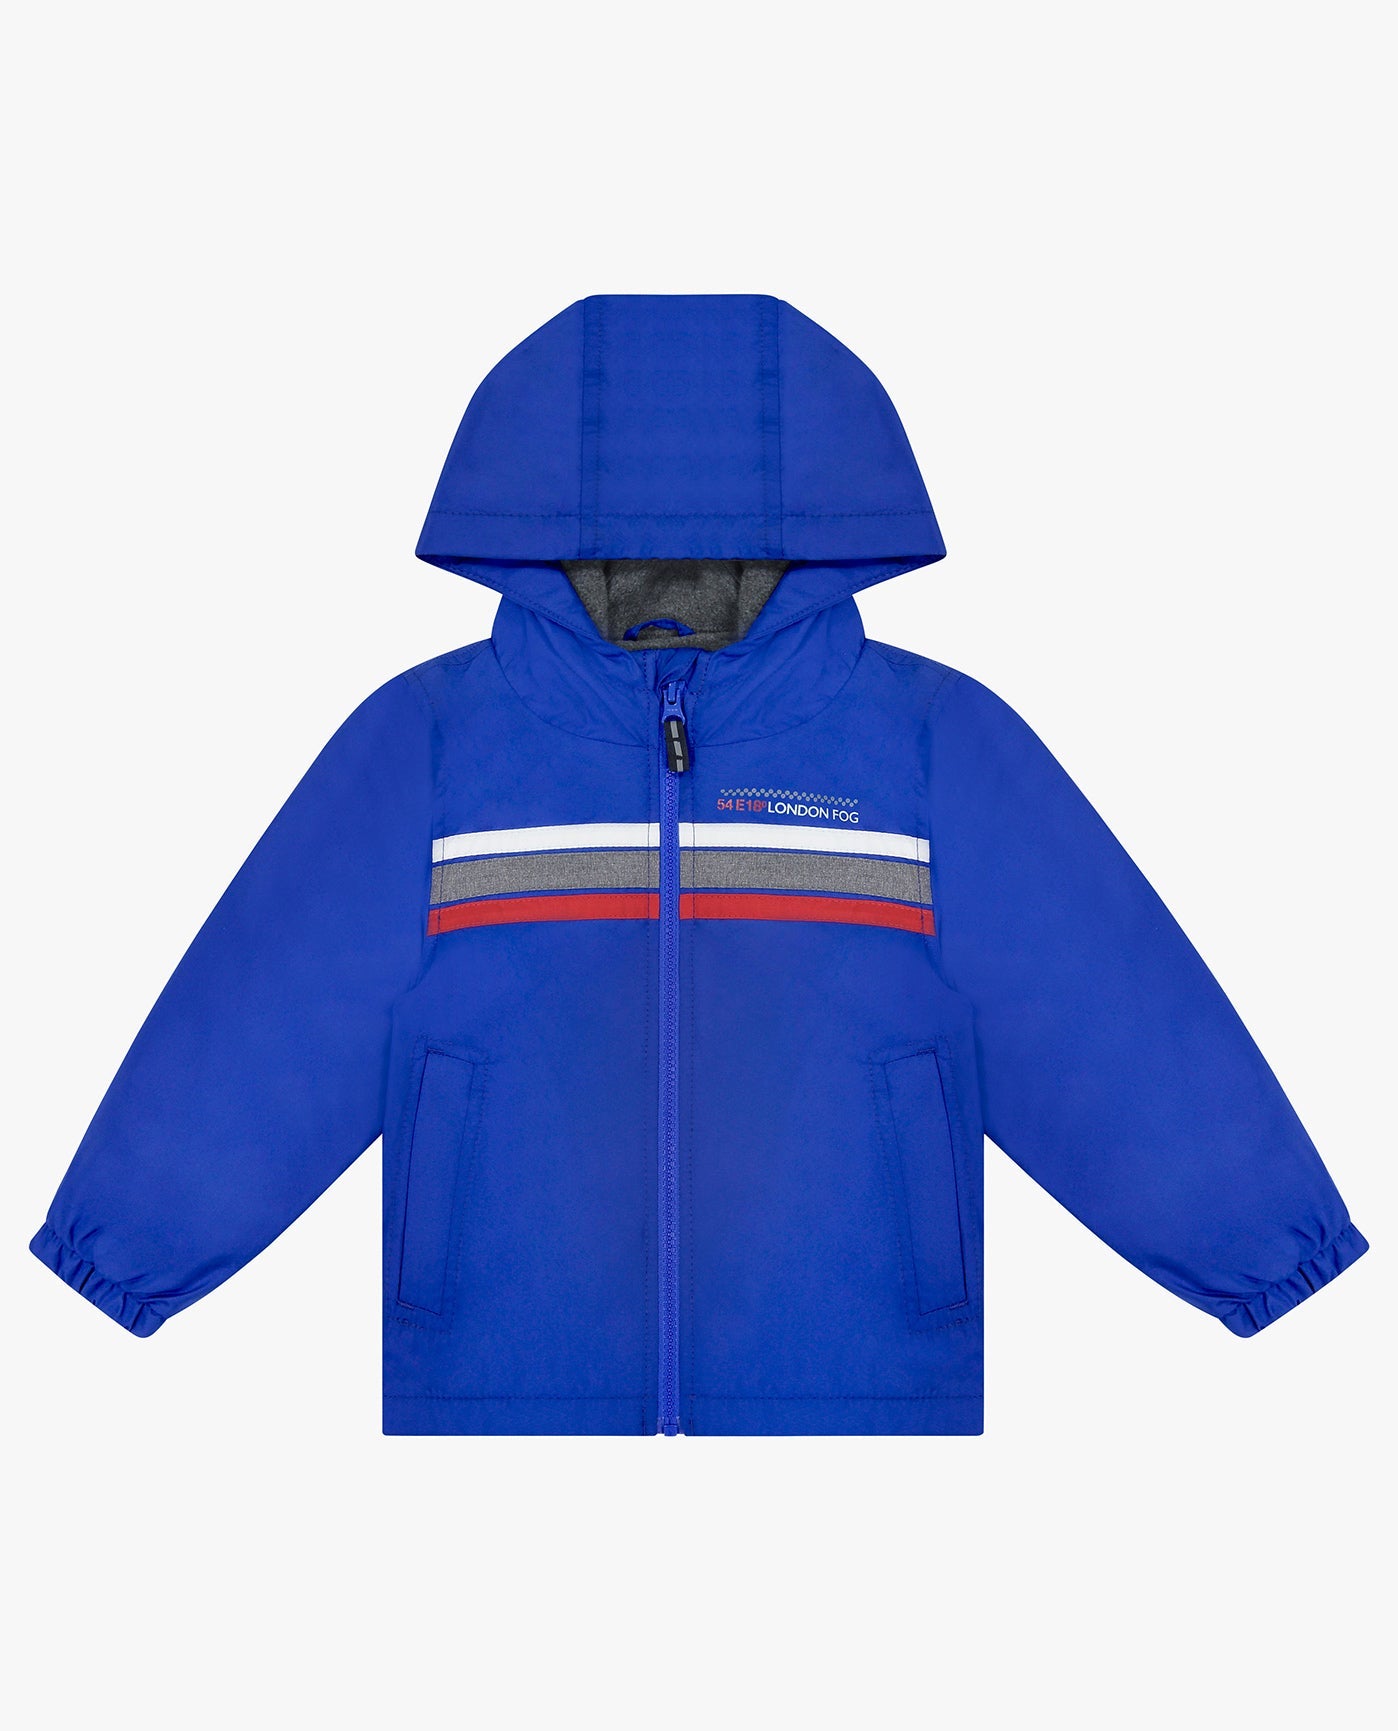 ALT VIEW OF TODDLER BOYS ZIP FRONT HOODED SPORTY STRIPE RAINCOAT | BLUE